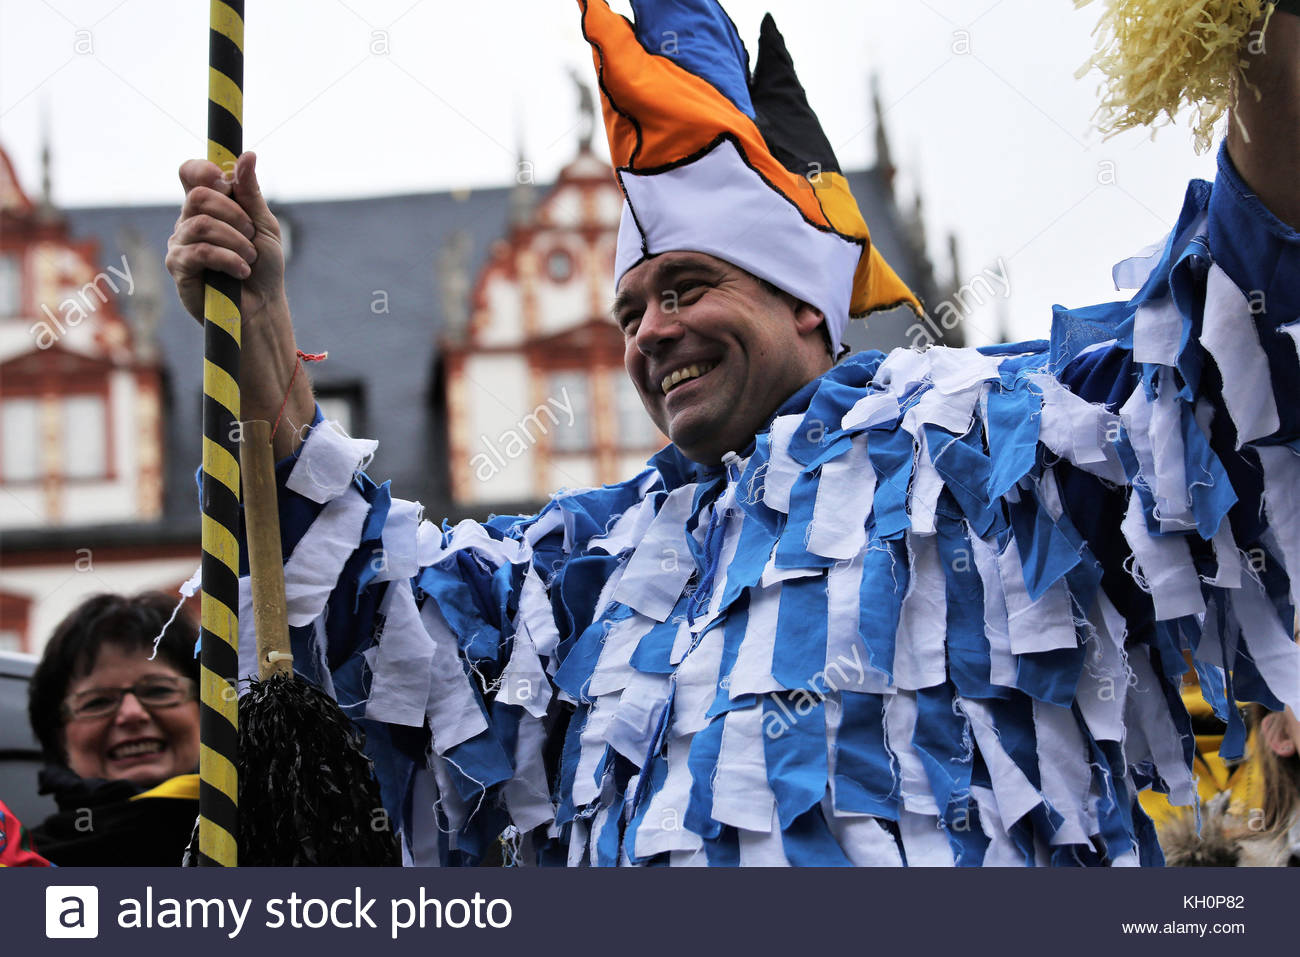 Coburg, Germany. 11th Nov, 2017. The jester at the opening ceremony of this year's carnival season plays to the crowd. The carnival season begins today at eleven o'clock on the eleventh day on the eleventh month of the year and reaches its climax in February. Credit: reallifephotos/Alamy Live News Stock Photo